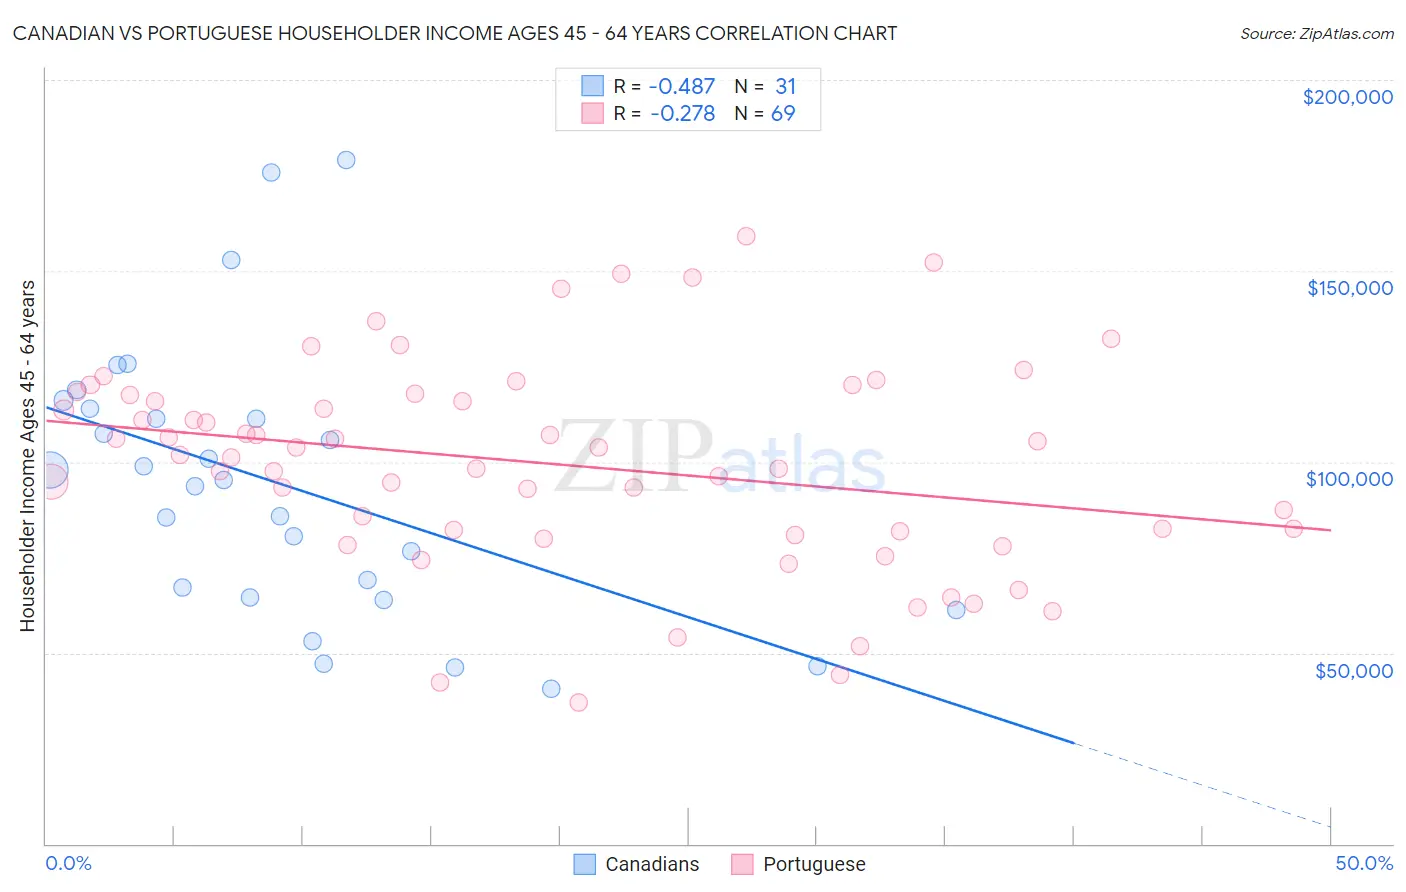 Canadian vs Portuguese Householder Income Ages 45 - 64 years